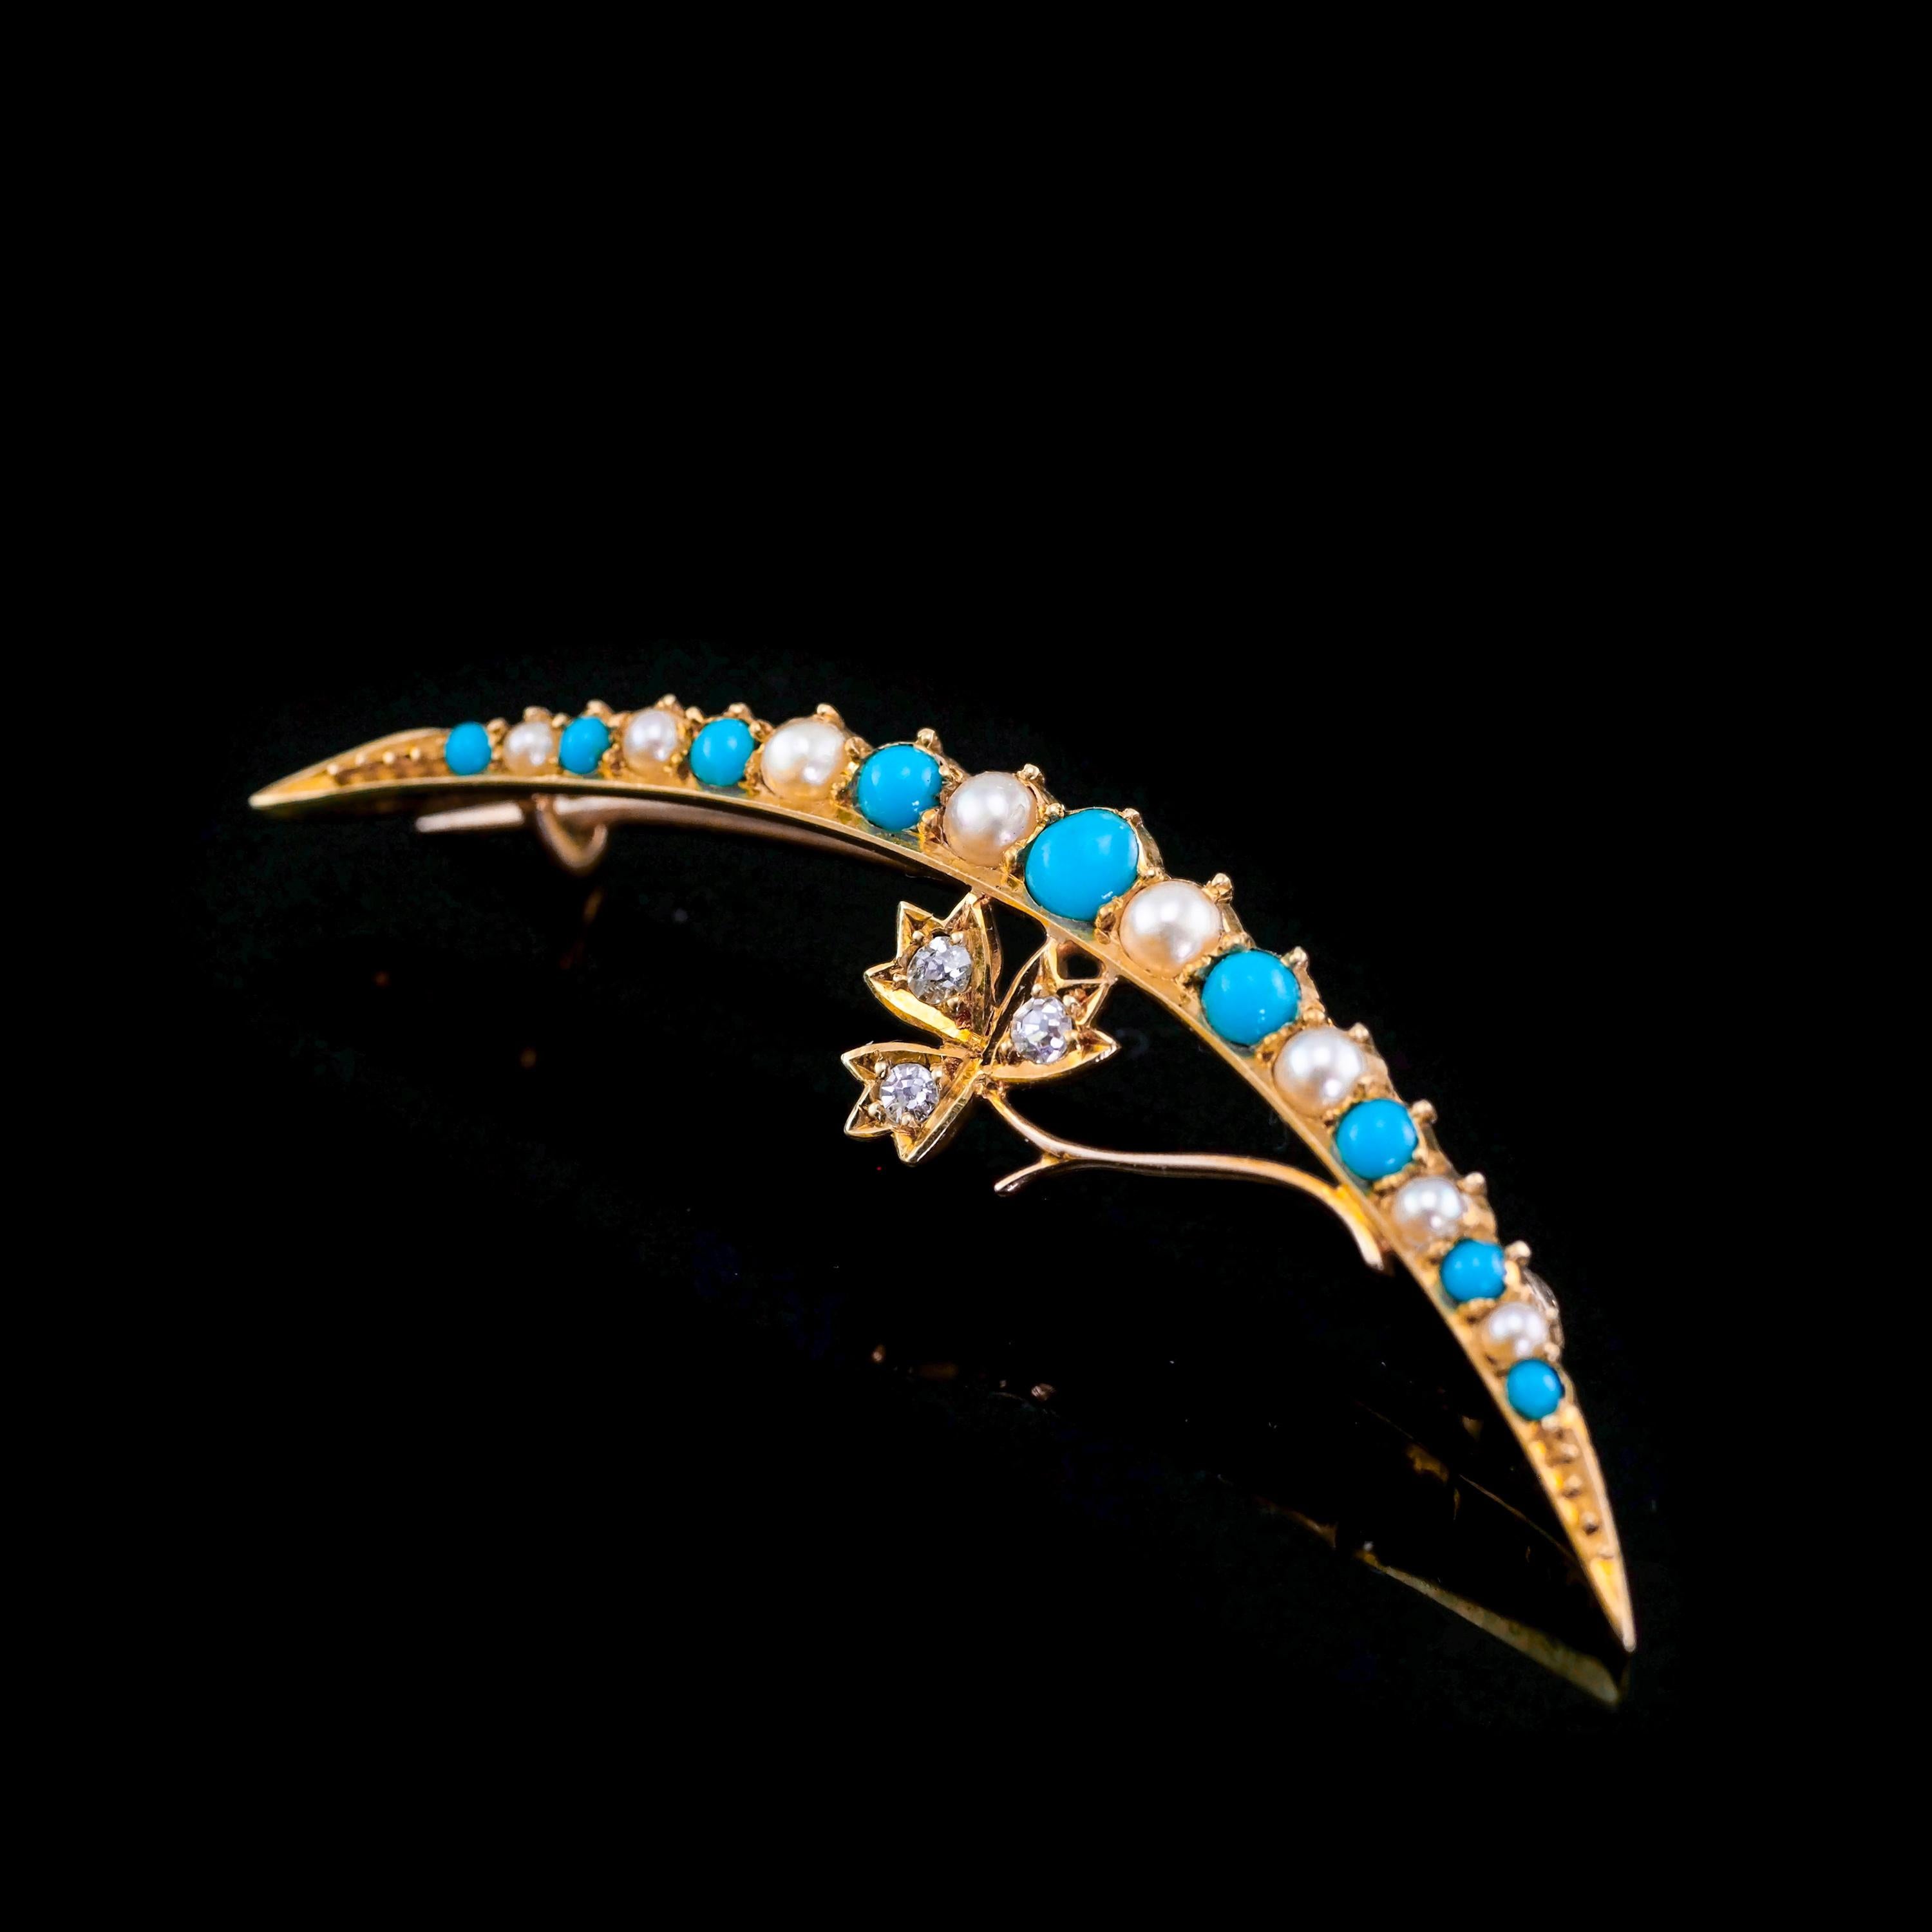 Antique Victorian 15k Gold Turquoise, Pearl & Diamond Crescent Brooch, c.1900 For Sale 8